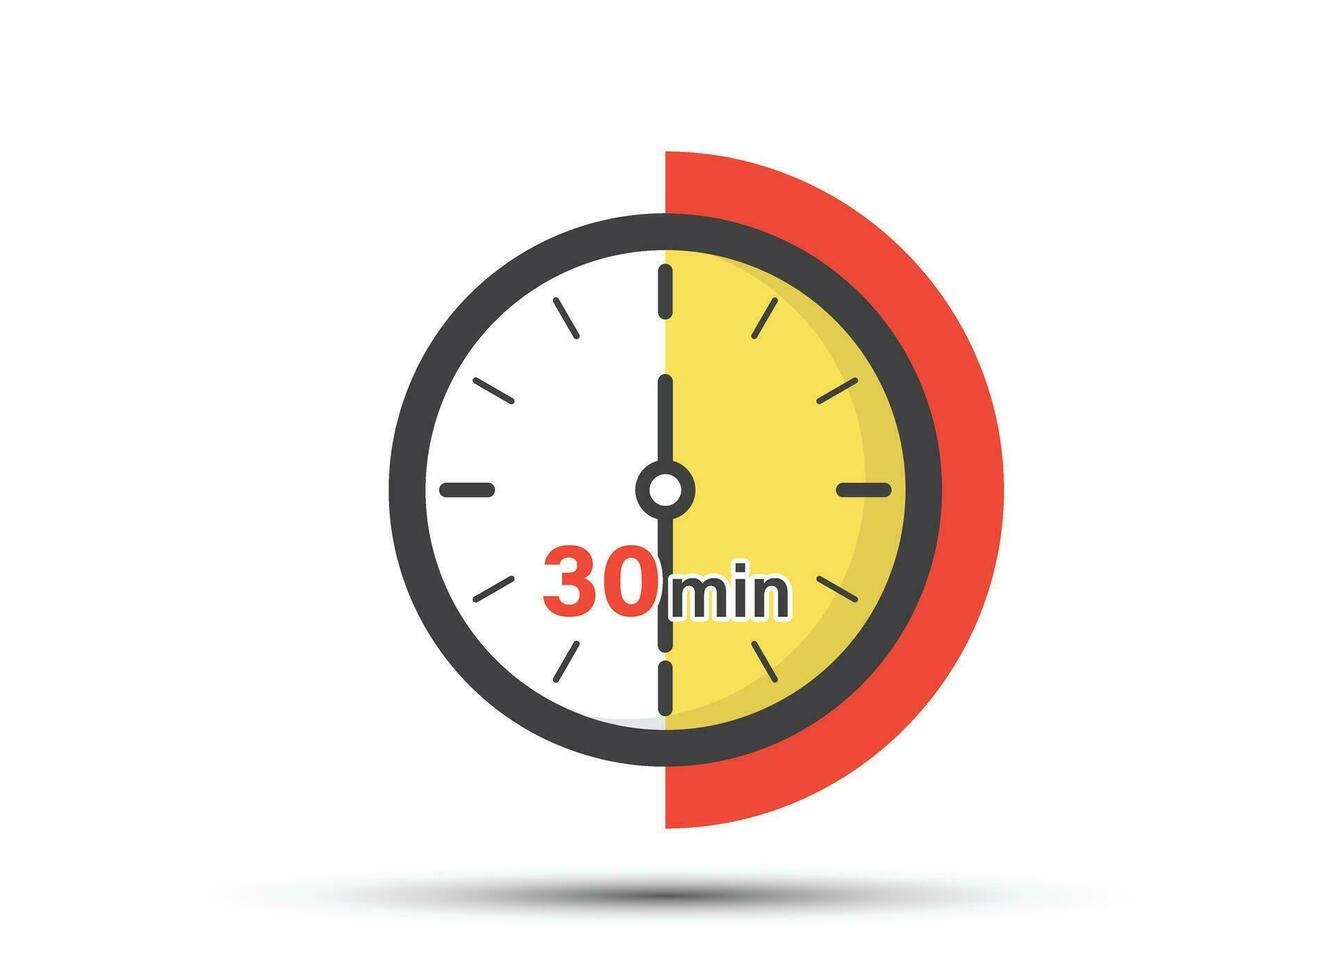 30 minutes on stopwatch icon in flat style. Clock face timer vector illustration on isolated background. Countdown sign business concept.